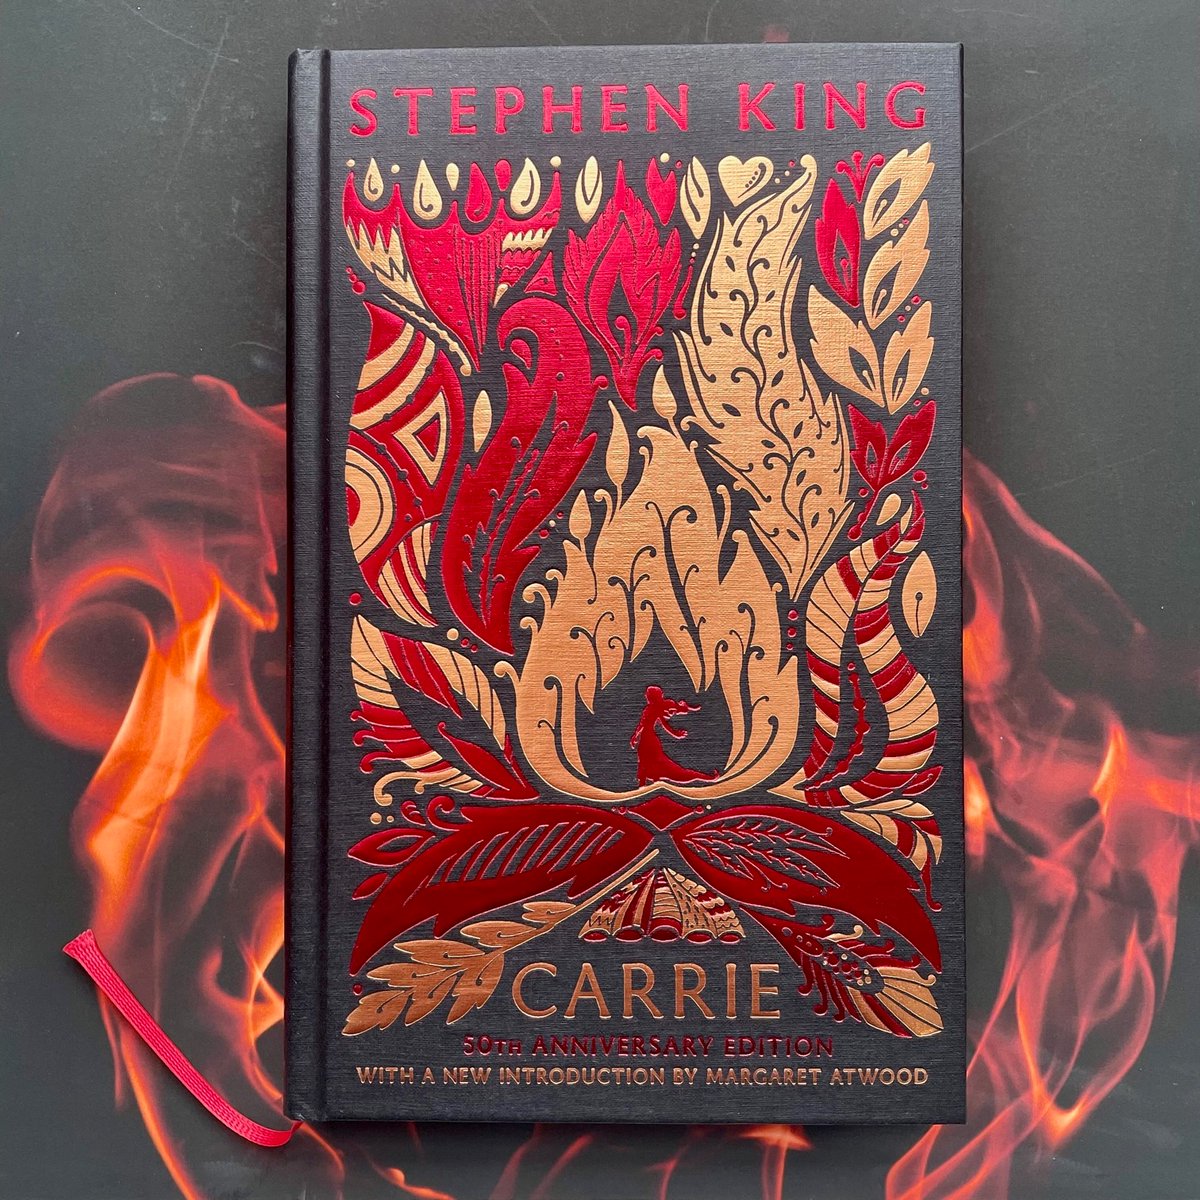 The stunning new hardback edition of @StephenKing's first bestseller: Carrie is out today! With a brand new introduction by Margaret Atwood and published in advance of the 50th anniversary next month. Find out more and order your copy here: brnw.ch/21wIfn4